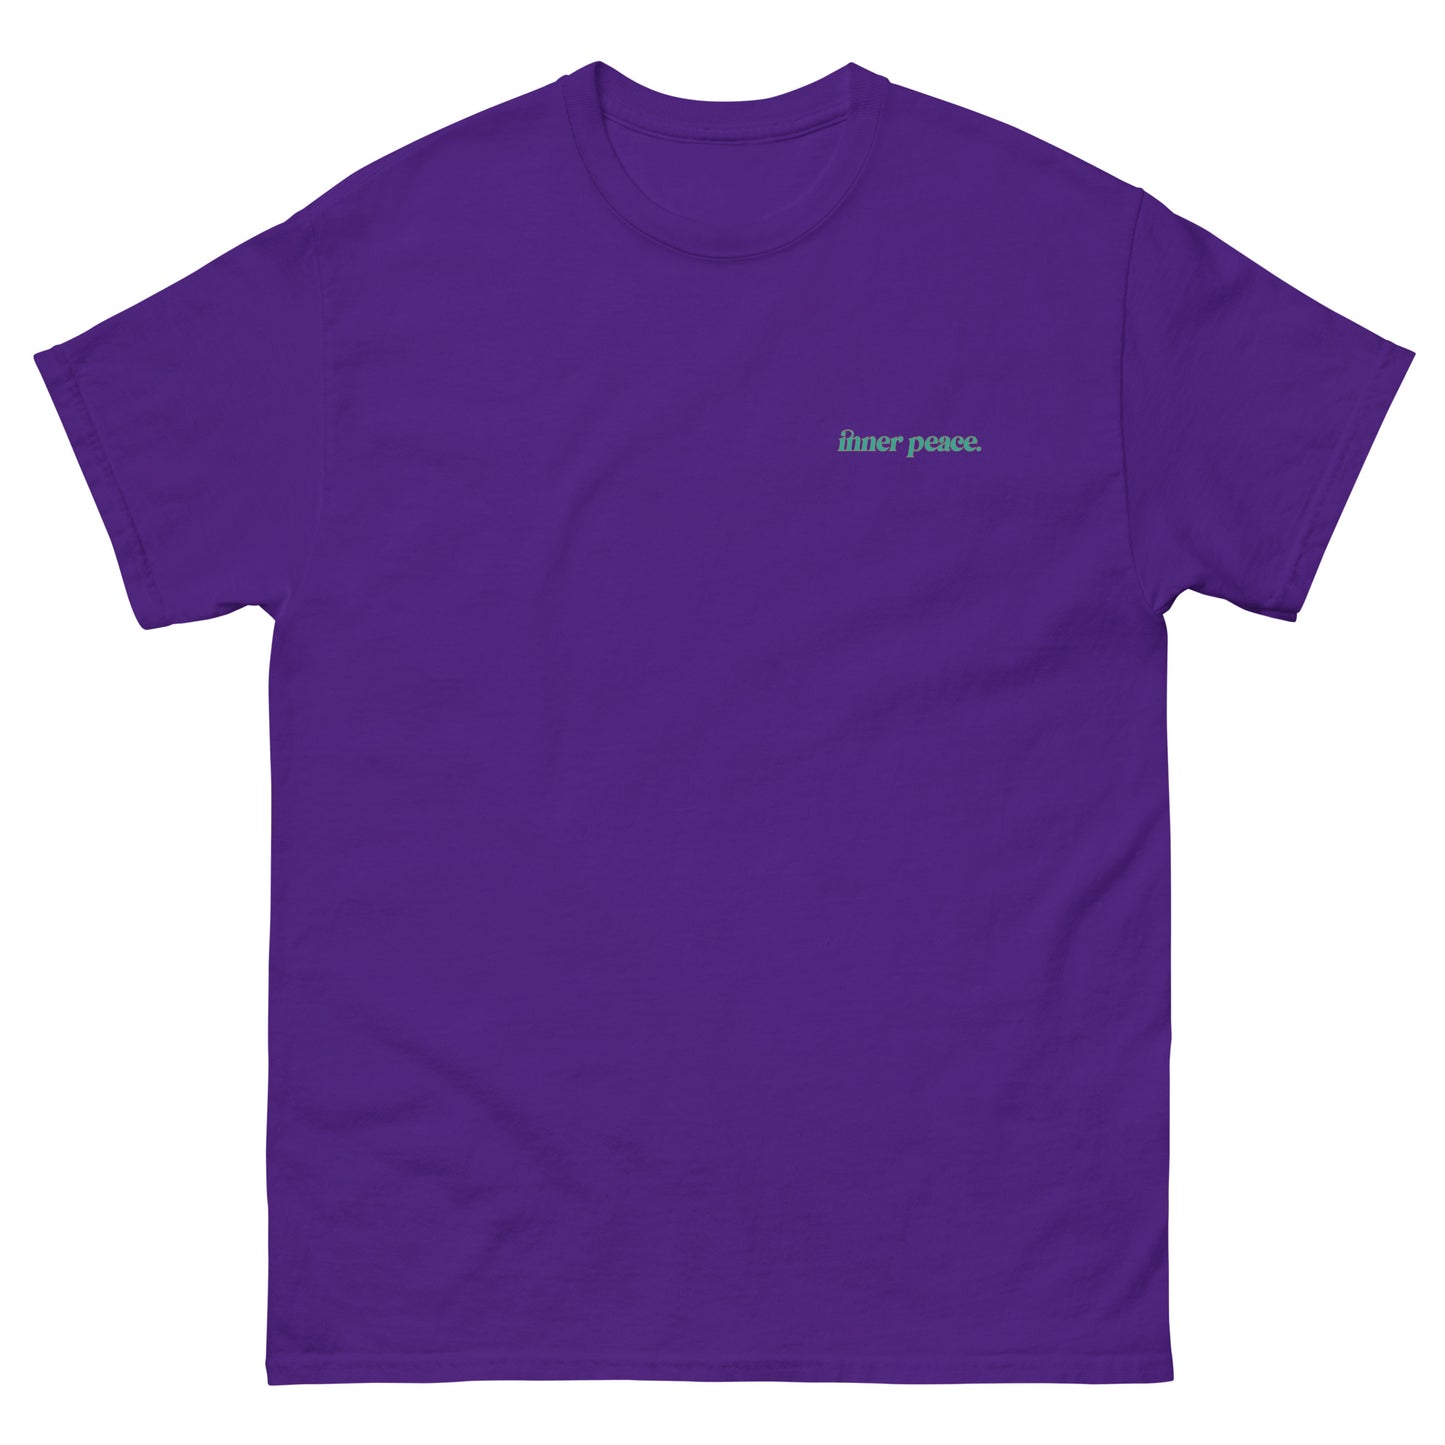 Purple High Quality Tee - Front Design with "inner peace " print on left chest - Back Design with a Phrase "You know what's the real luxury? Your inner peace." print